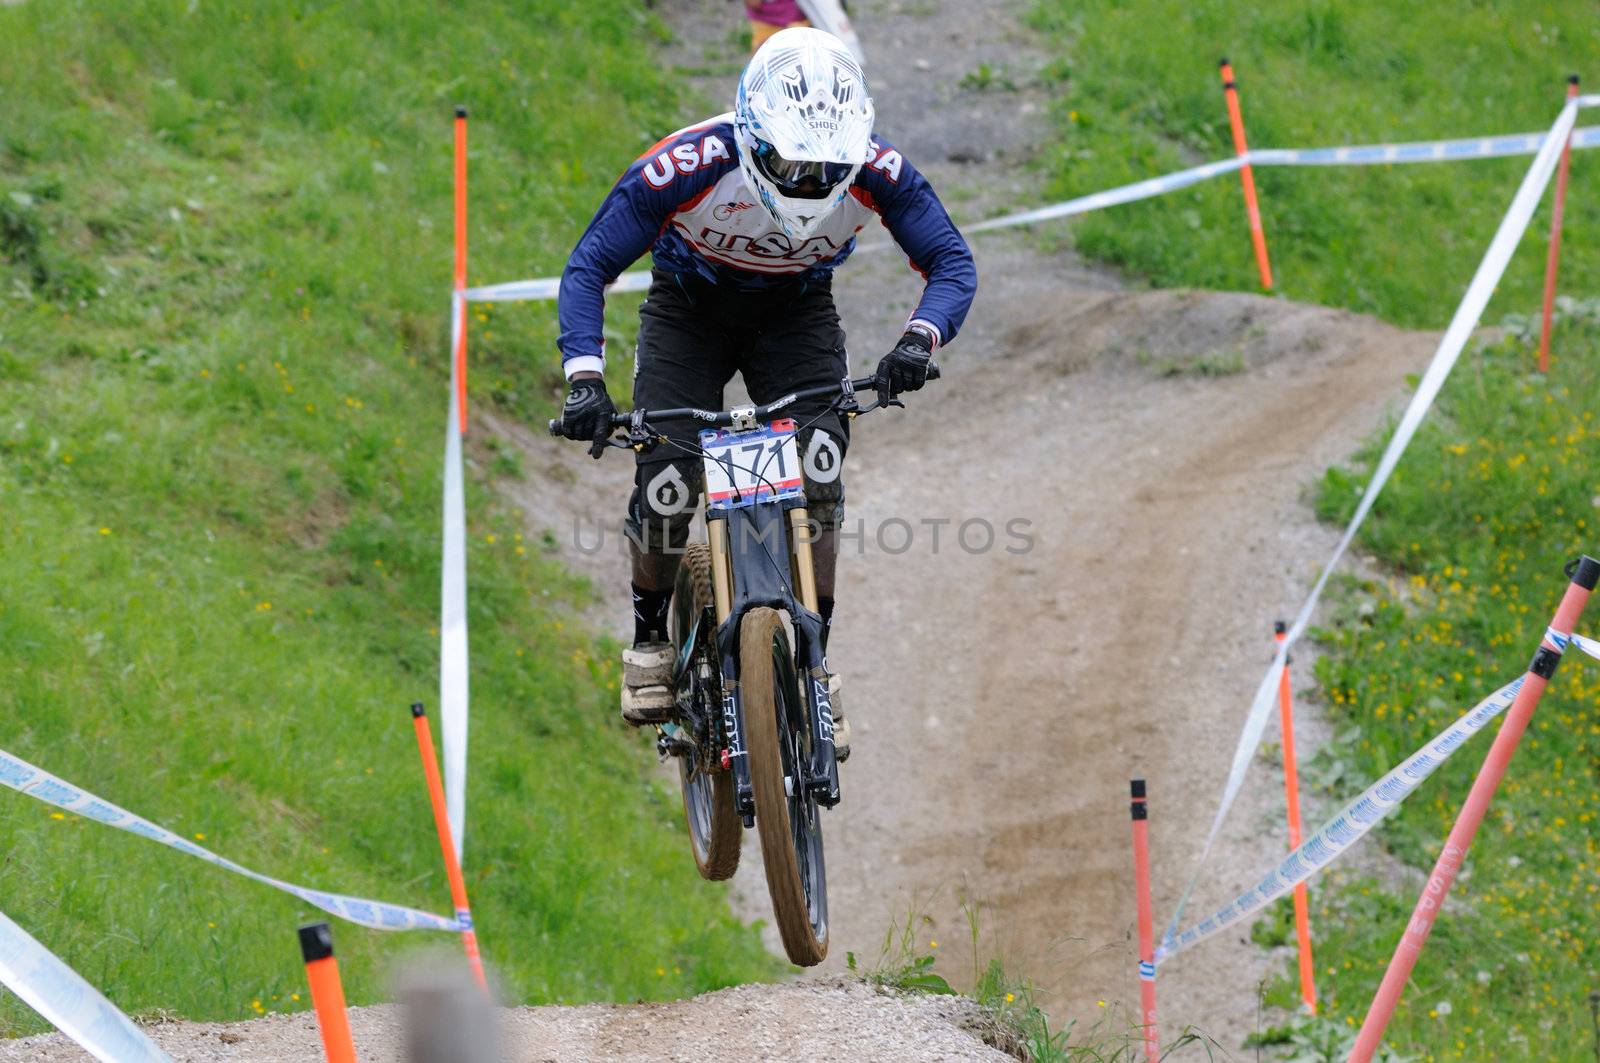 LEOGANG, AUSTRIA - JUN 12: UCI Mountain bike world cup. Participant at the downhill final race on June 12, 2011 in Leogang, Austria.